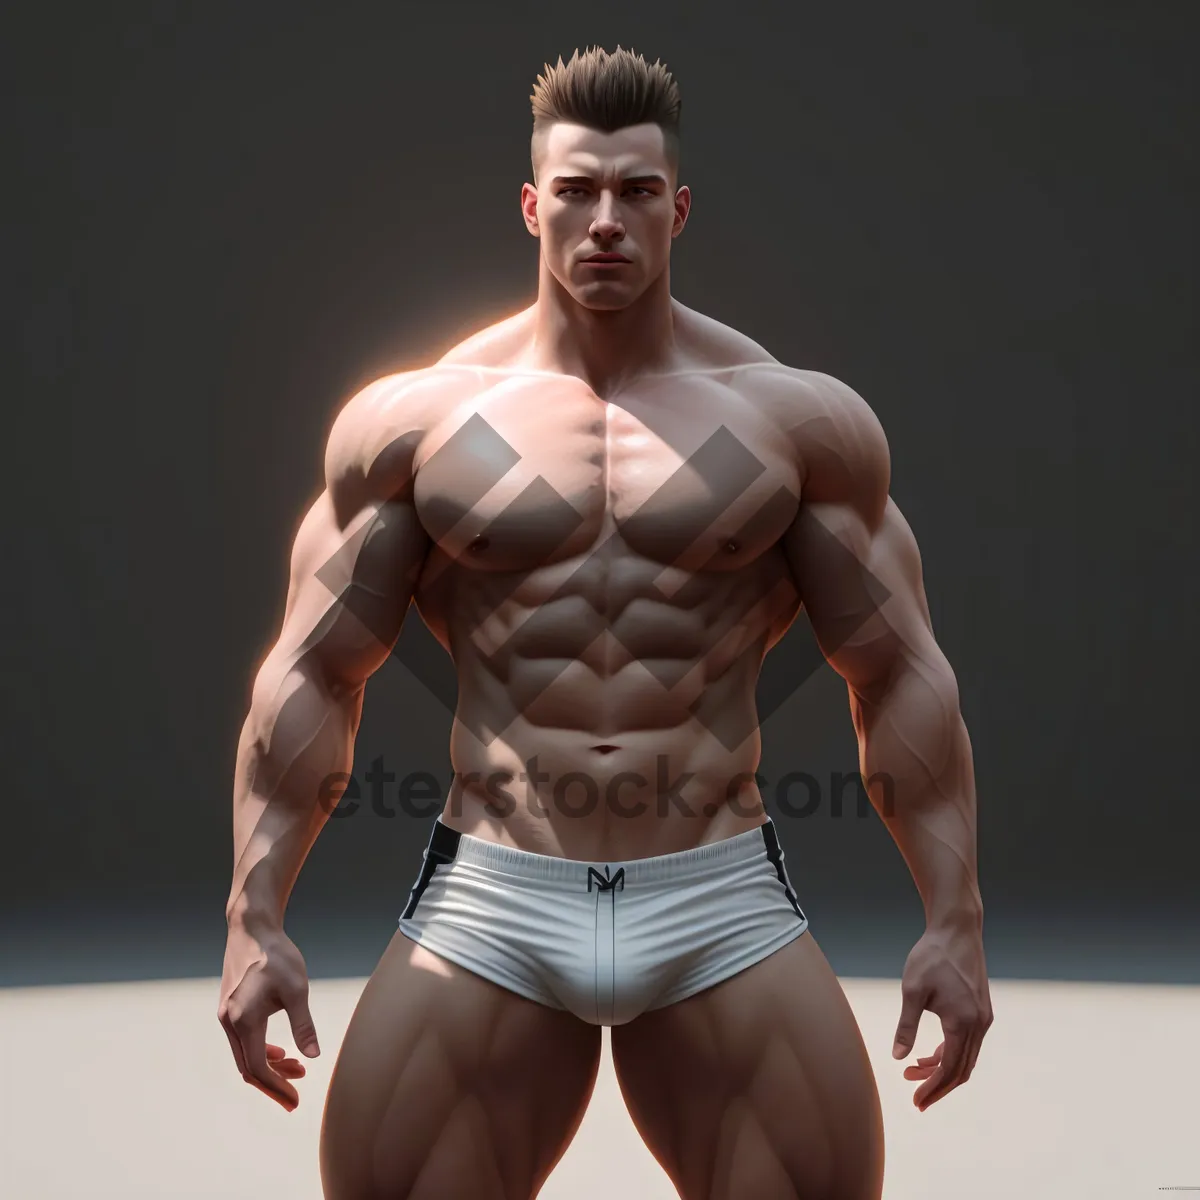 Picture of Fit and Ripped: The Ultimate Male Physique